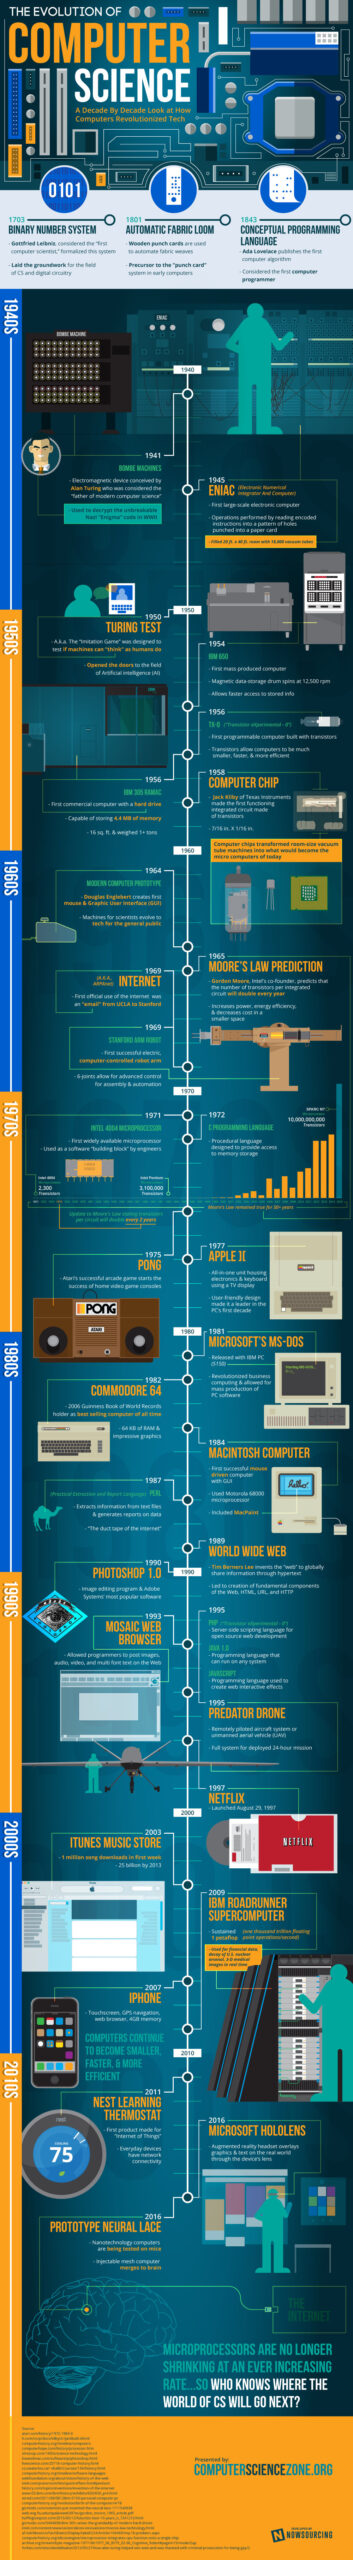 Computers Through The Ages 1939 - 1984 #infographic - Visualistan